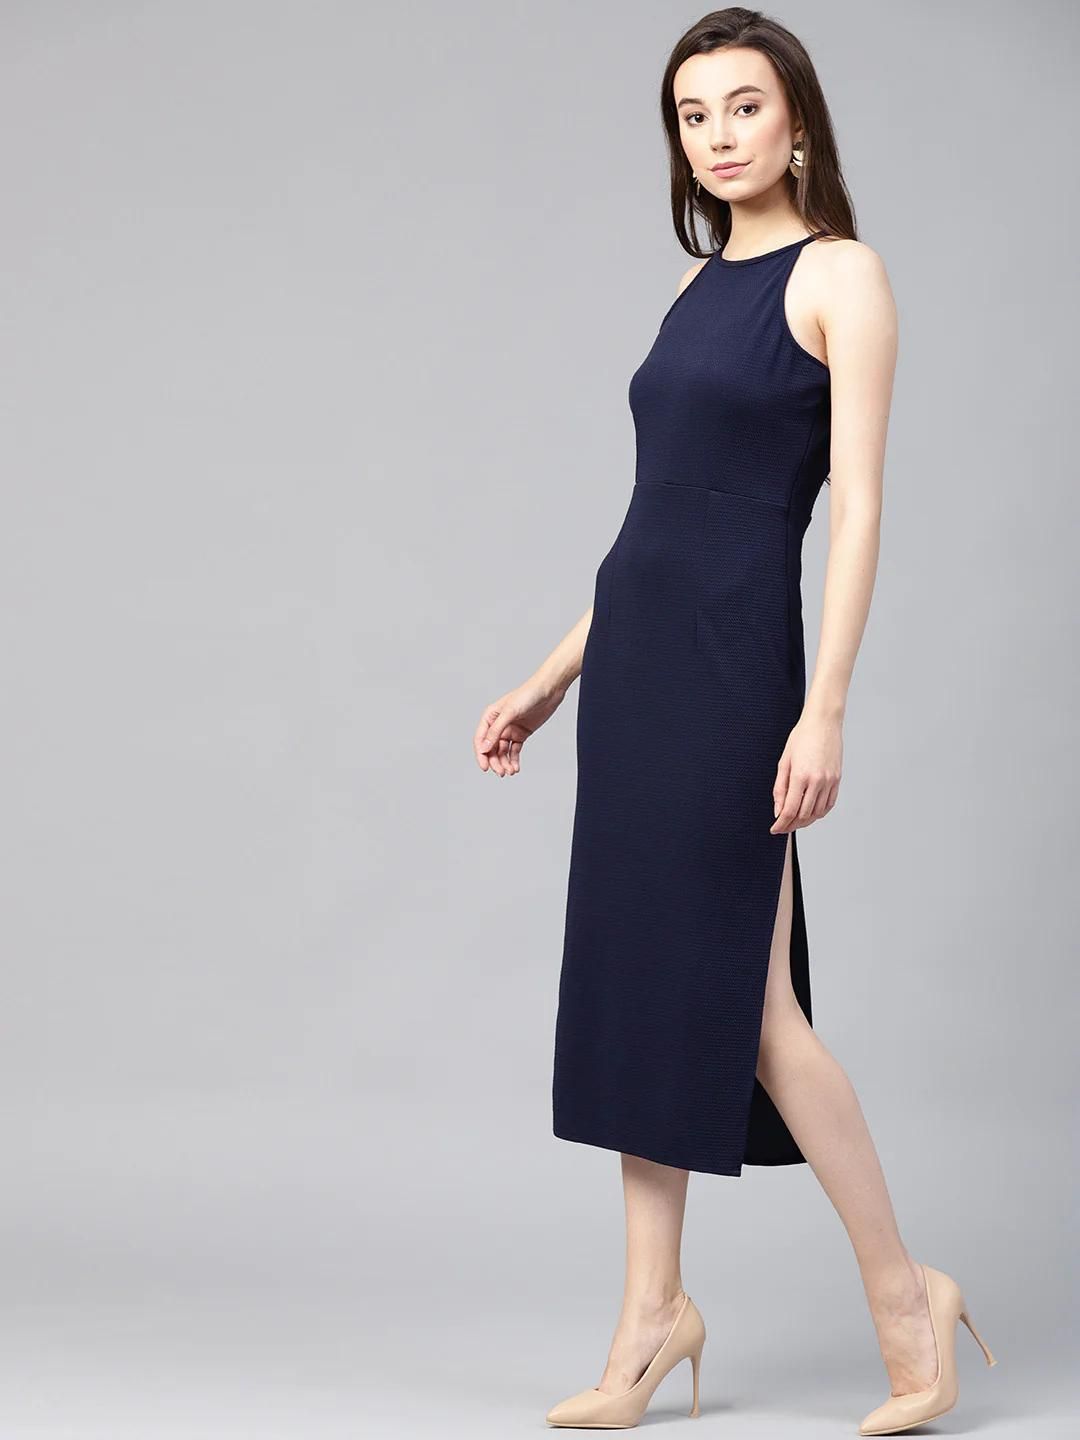 PANNKH Solid Navy Blue Incut Fitted Midi Dress